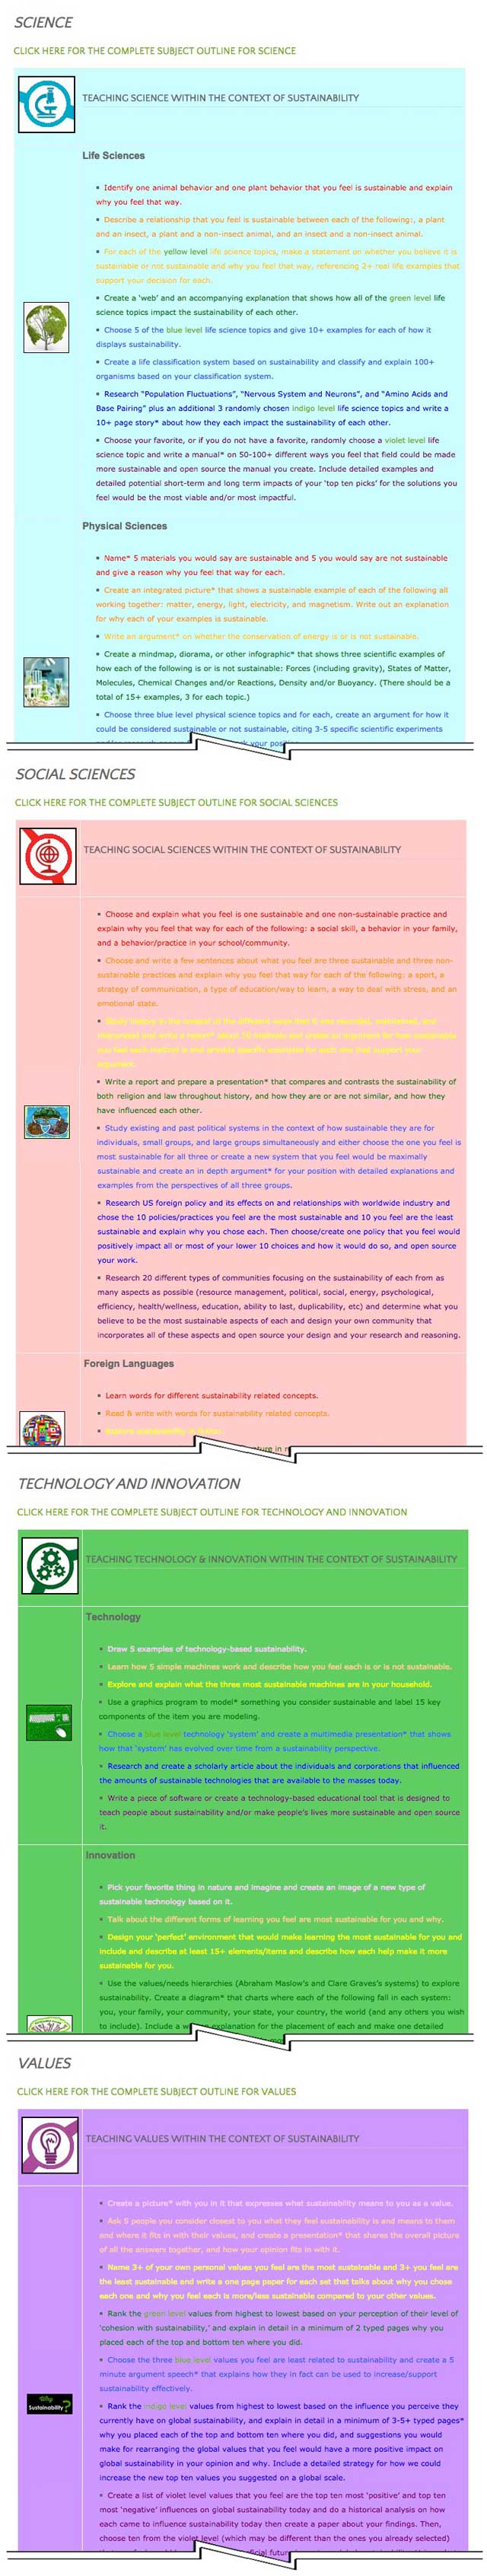 This last week the core team transferred the final 50% of the written content for the Sustainability Lesson Plan to the website, as you see here. This lesson plan purposed to teach all subjects, to all learning levels, in any learning environment, using the central theme of “Sustainability” is now 100% complete